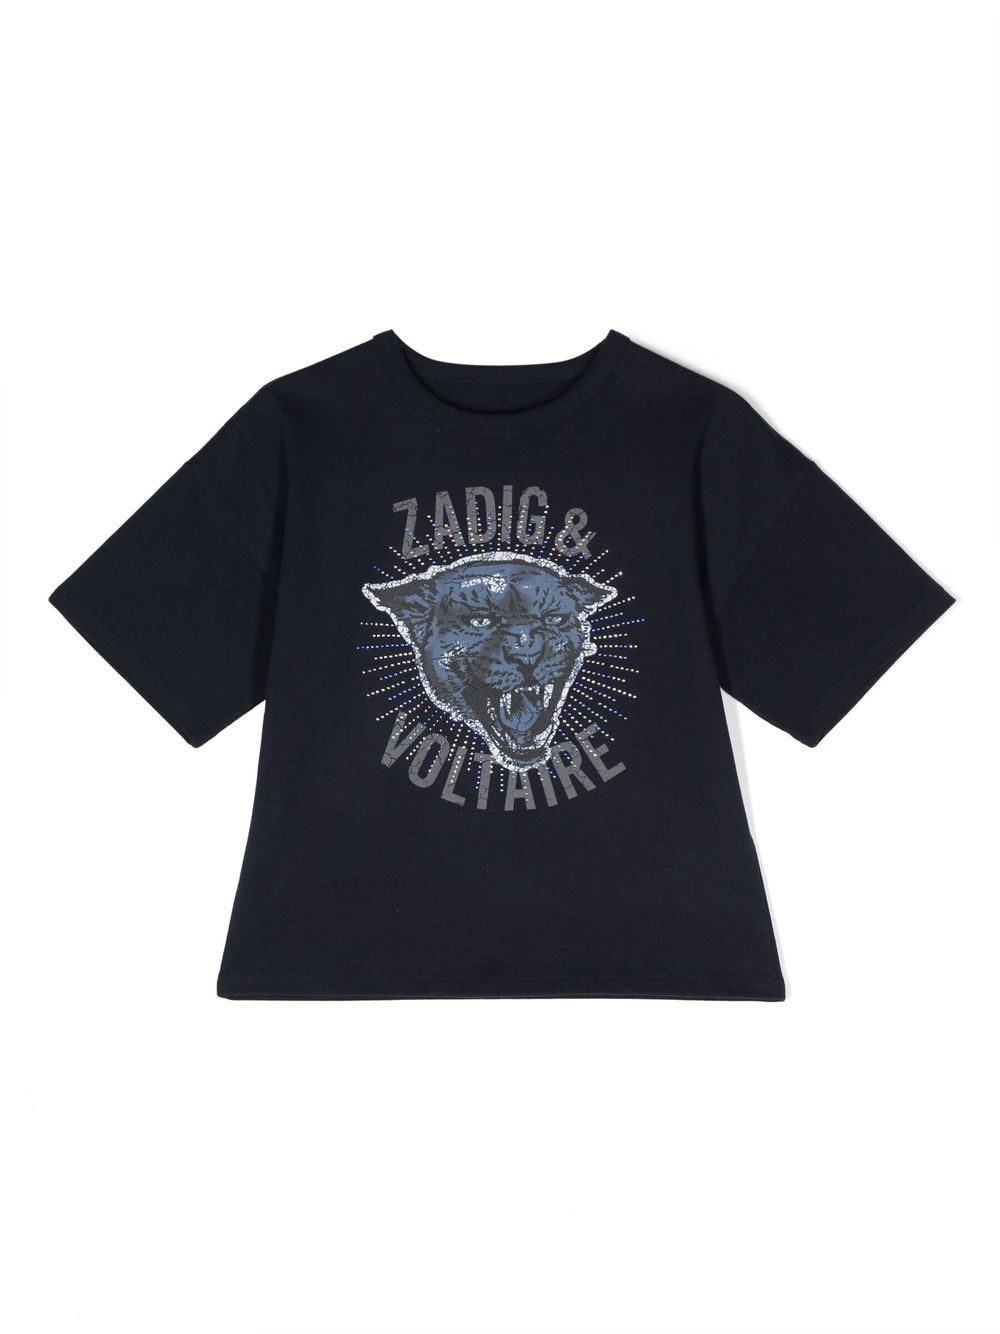 Zadig & Voltaire T-shirts & Jerseys For Women - Farfetch